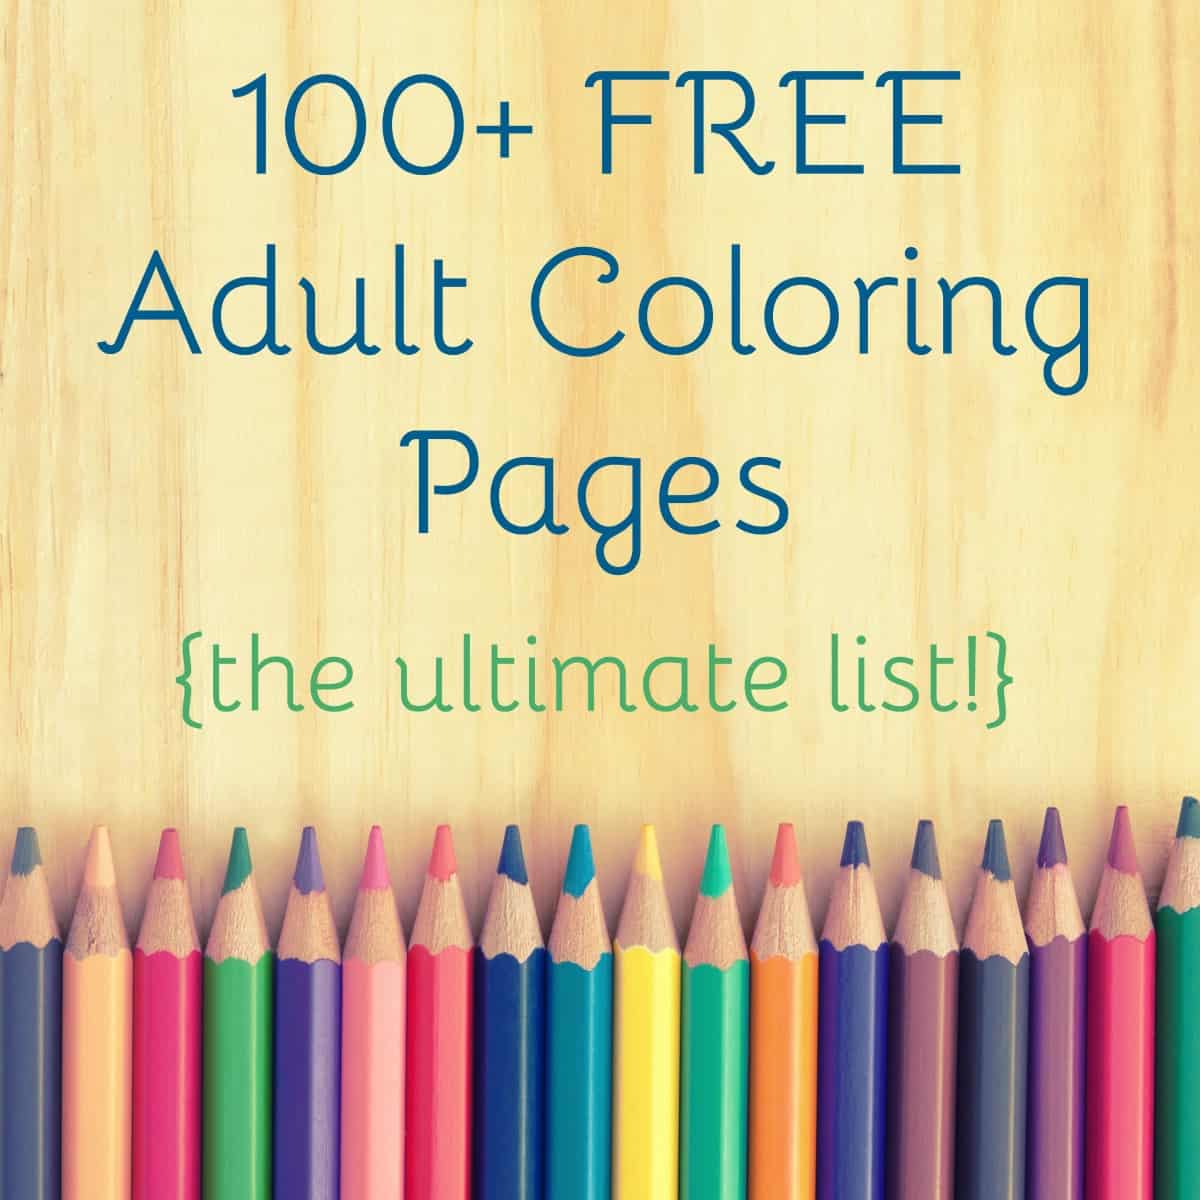 the-ultimate-guide-to-free-adult-coloring-pages-over-100-laptrinhx-news